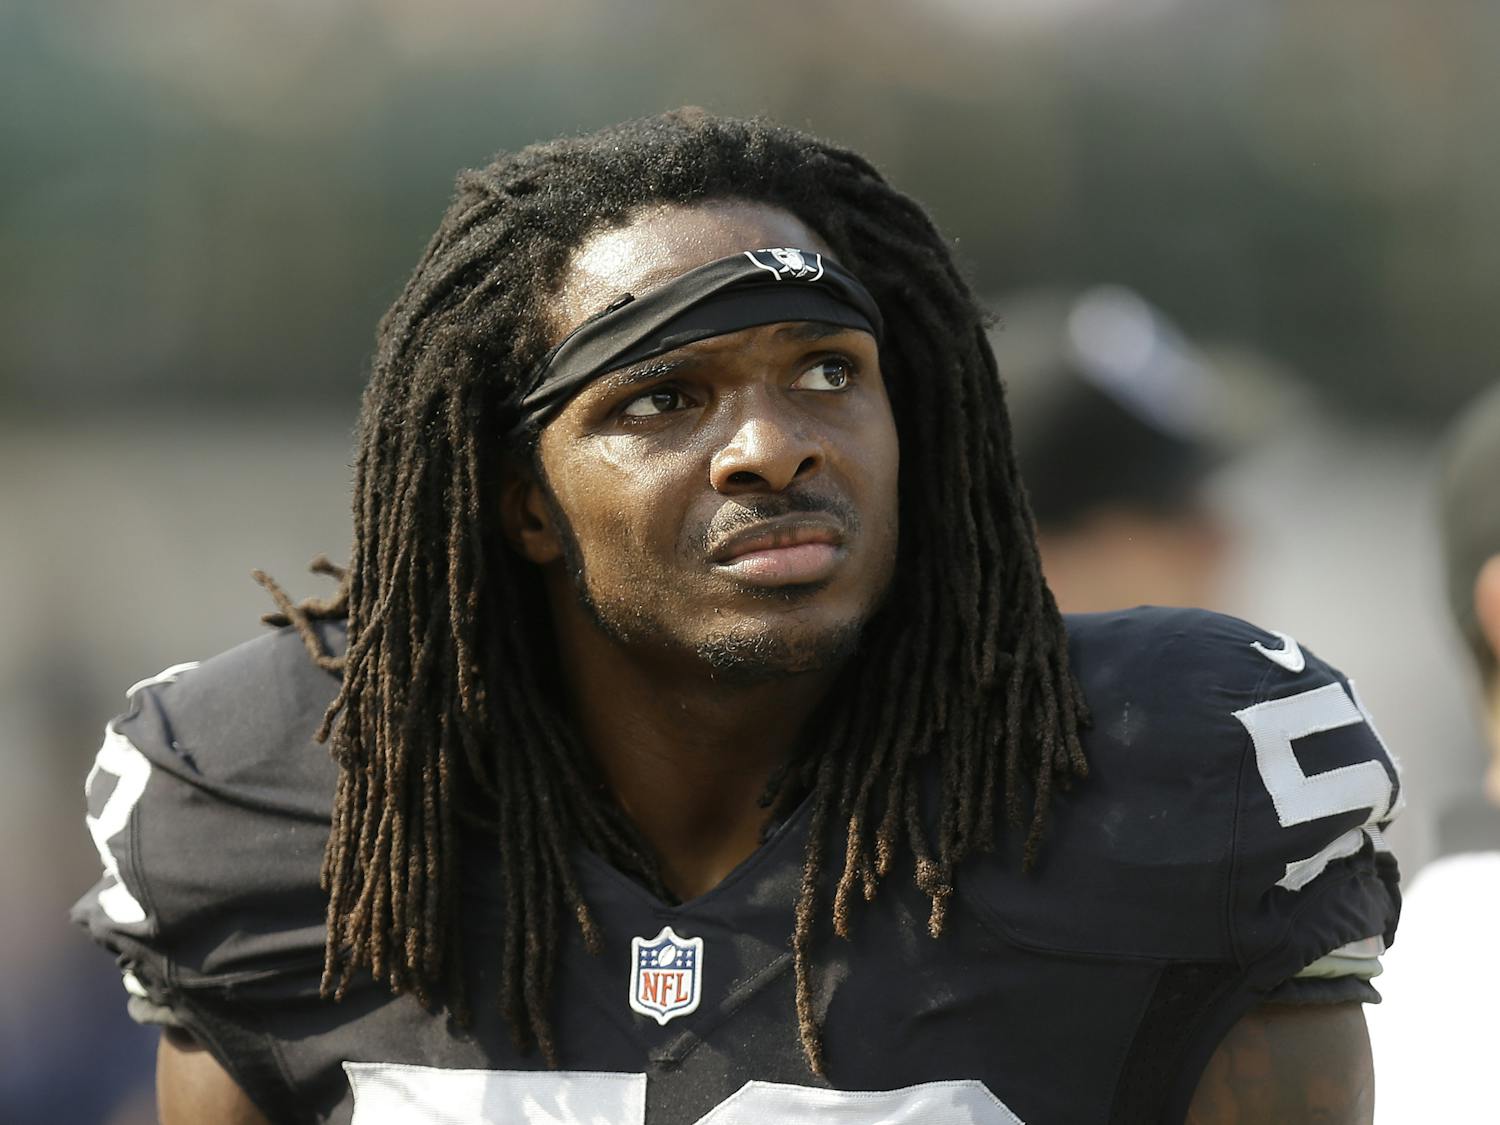 In this Sunday, Sept. 13, 2015 photo, Oakland Raiders outside linebacker Neiron Ball (58) stands on the sideline during the second half of an NFL football game against the Cincinnati Bengals in Oakland, Calif. Former Oakland Raiders linebacker Neiron Ball, who played college football at Florida after recovering from brain surgery, has died. He was 27.(AP Photo/Ben Margot)